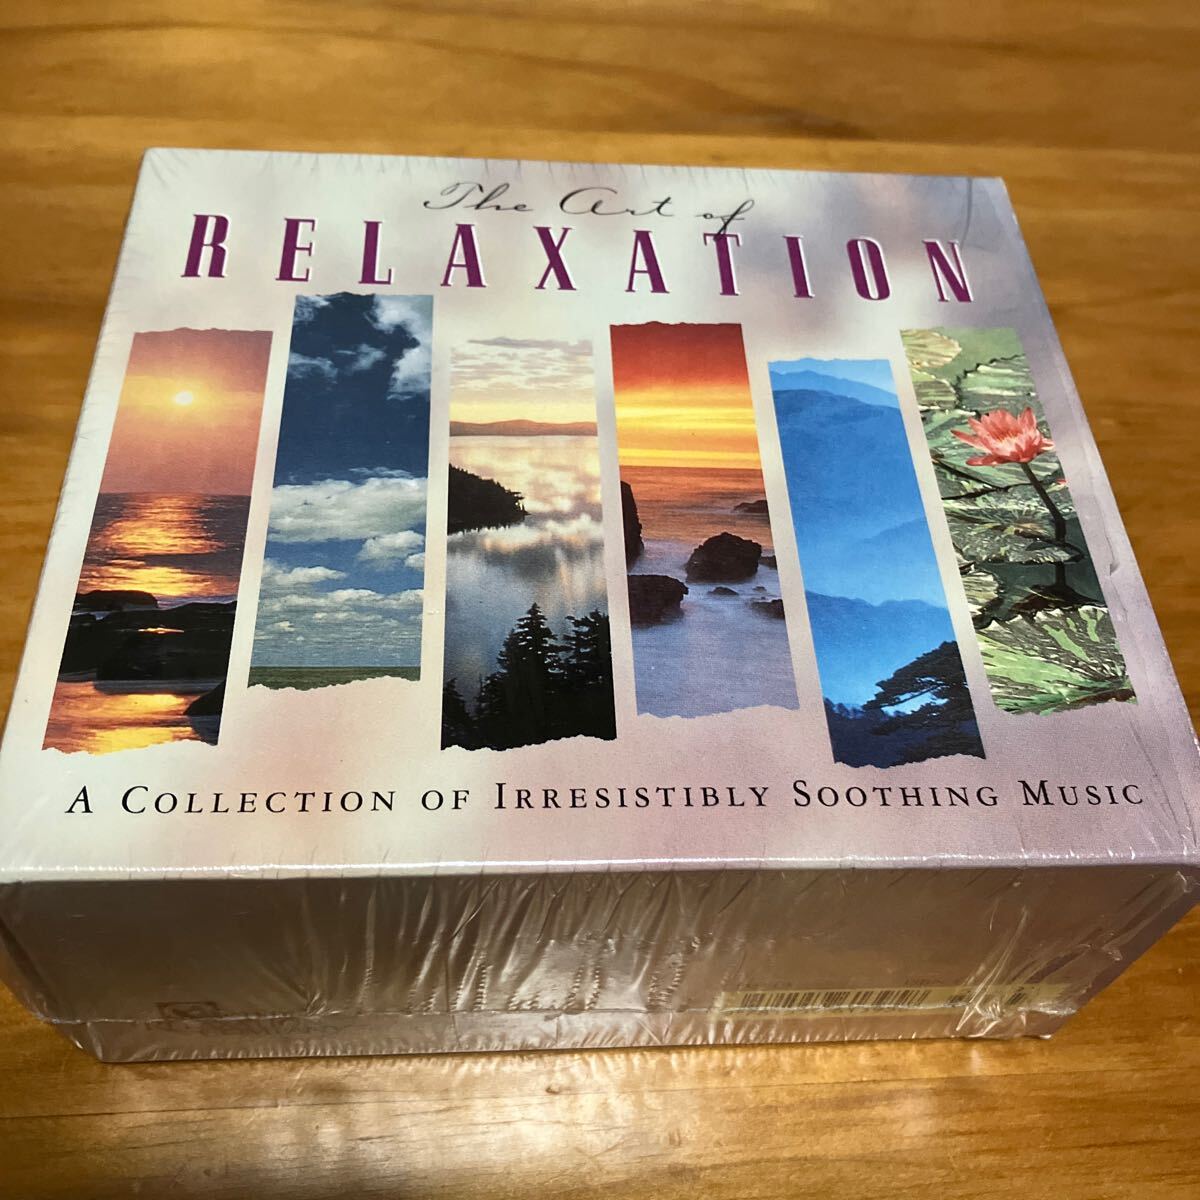 【6CD-BOX】 The Art Of Relaxation - A Collection Of Irresistably Soothing Music ヒーリング　ニューエイジ　アンビエント_画像1